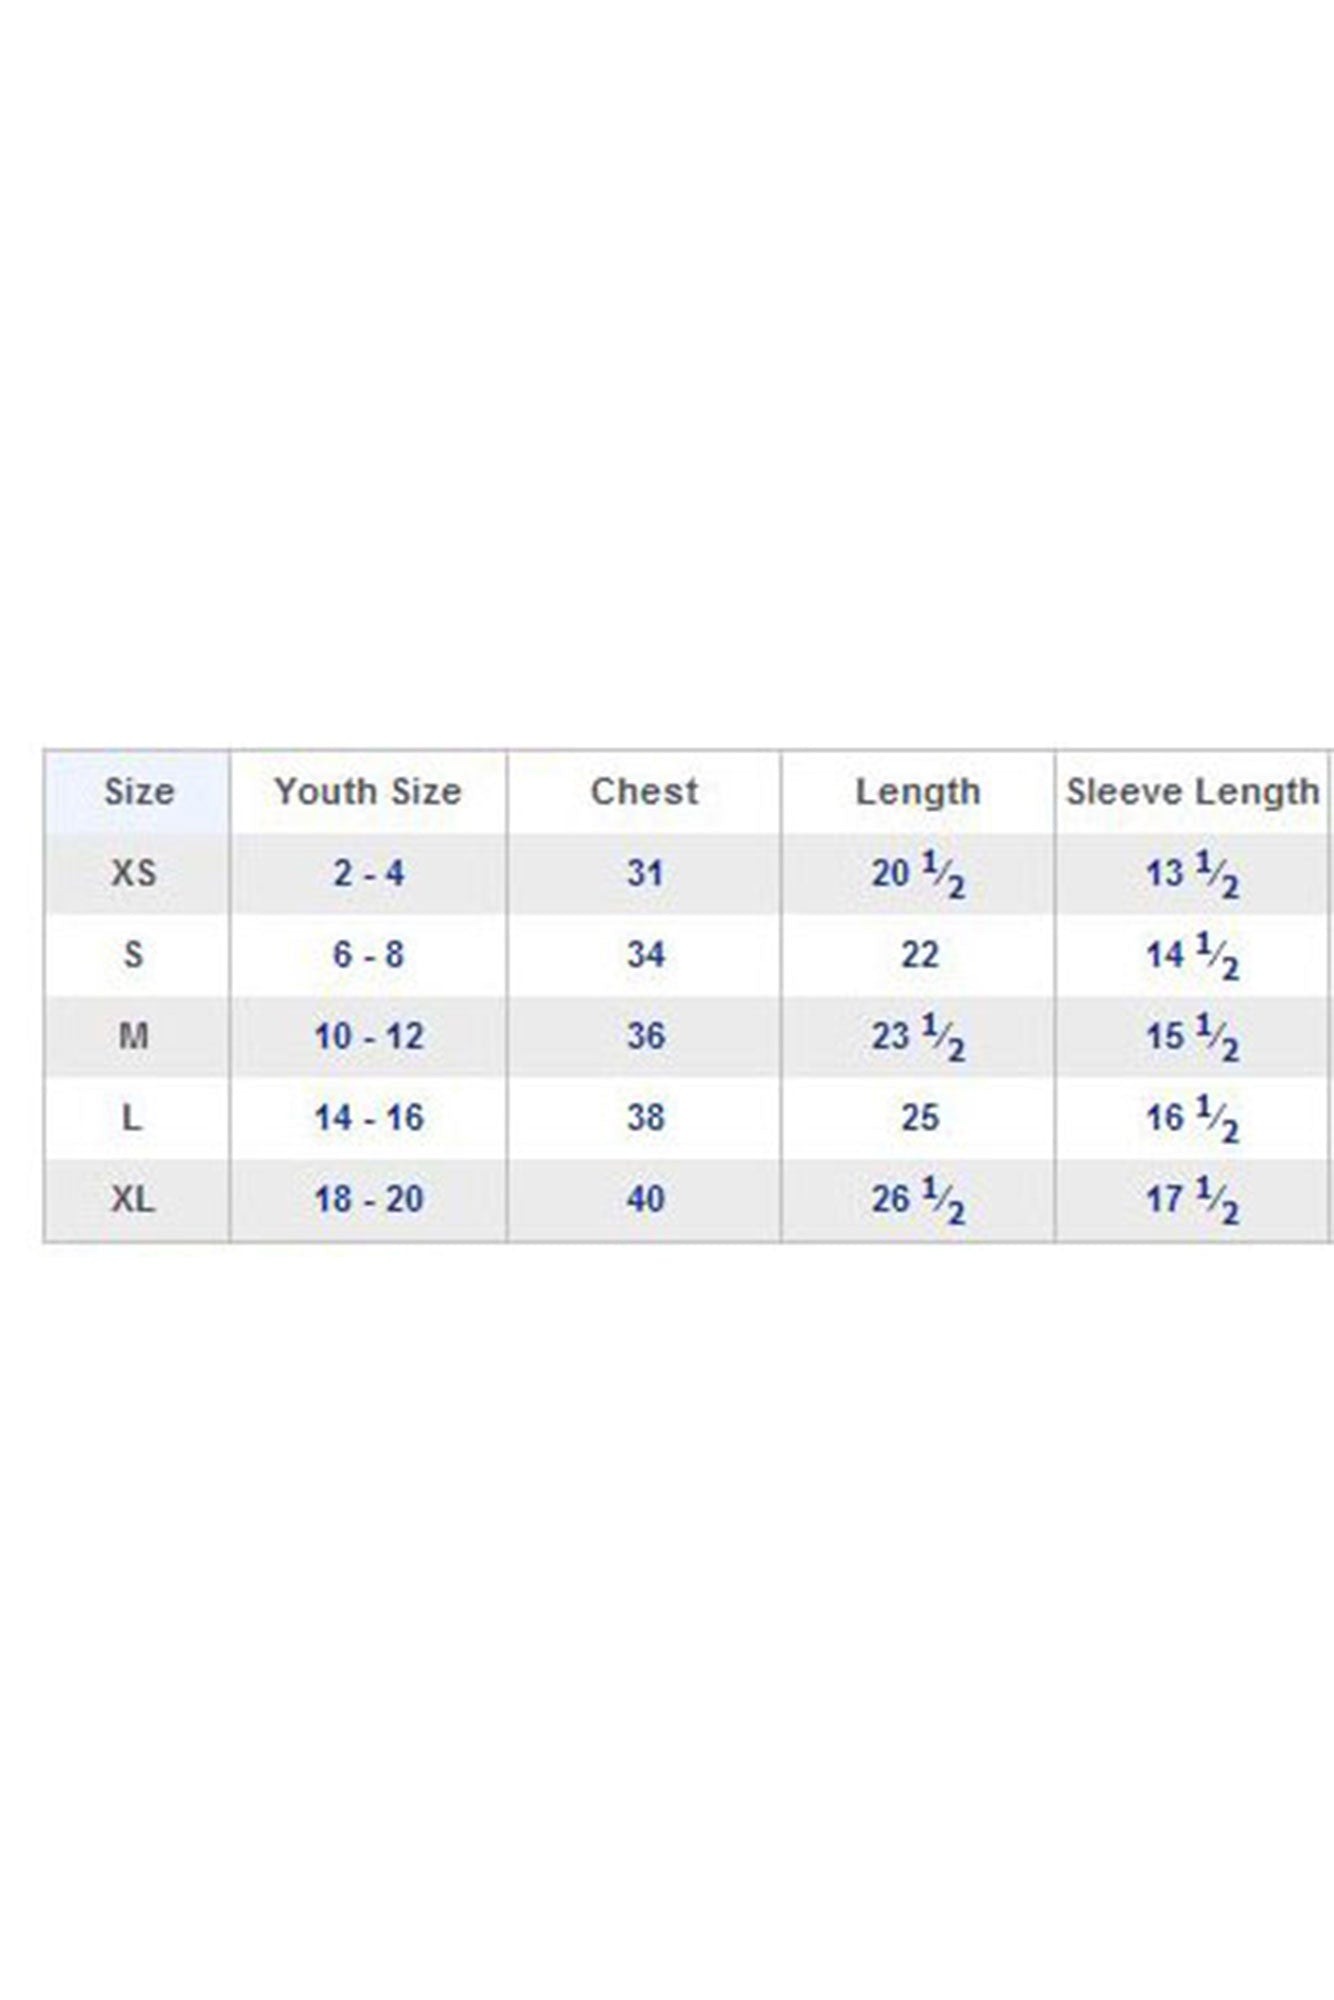 Cascade S Youth Size Chart